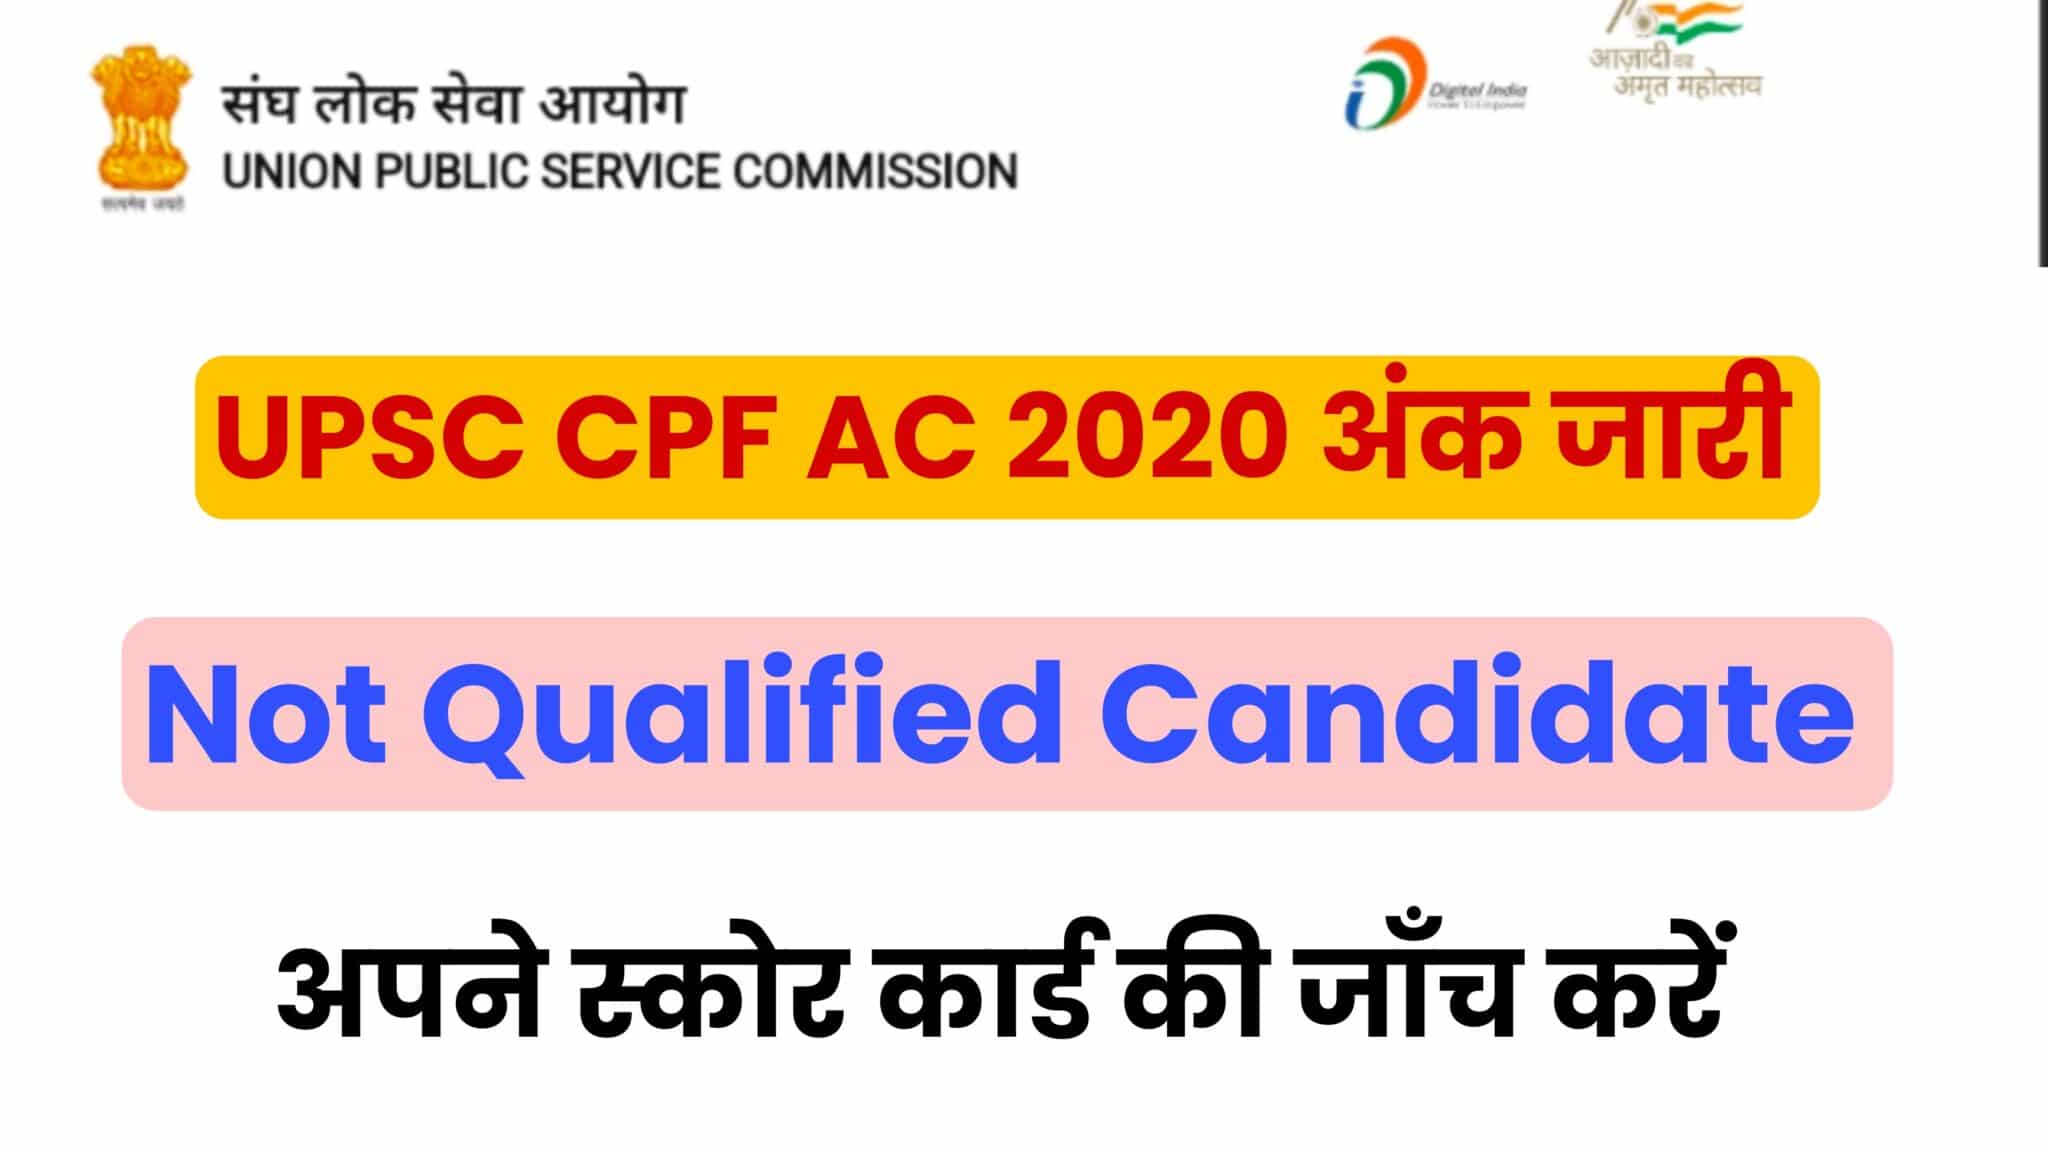 UPSC CPF AC 2020 Marks (Not Qualified Candidate)